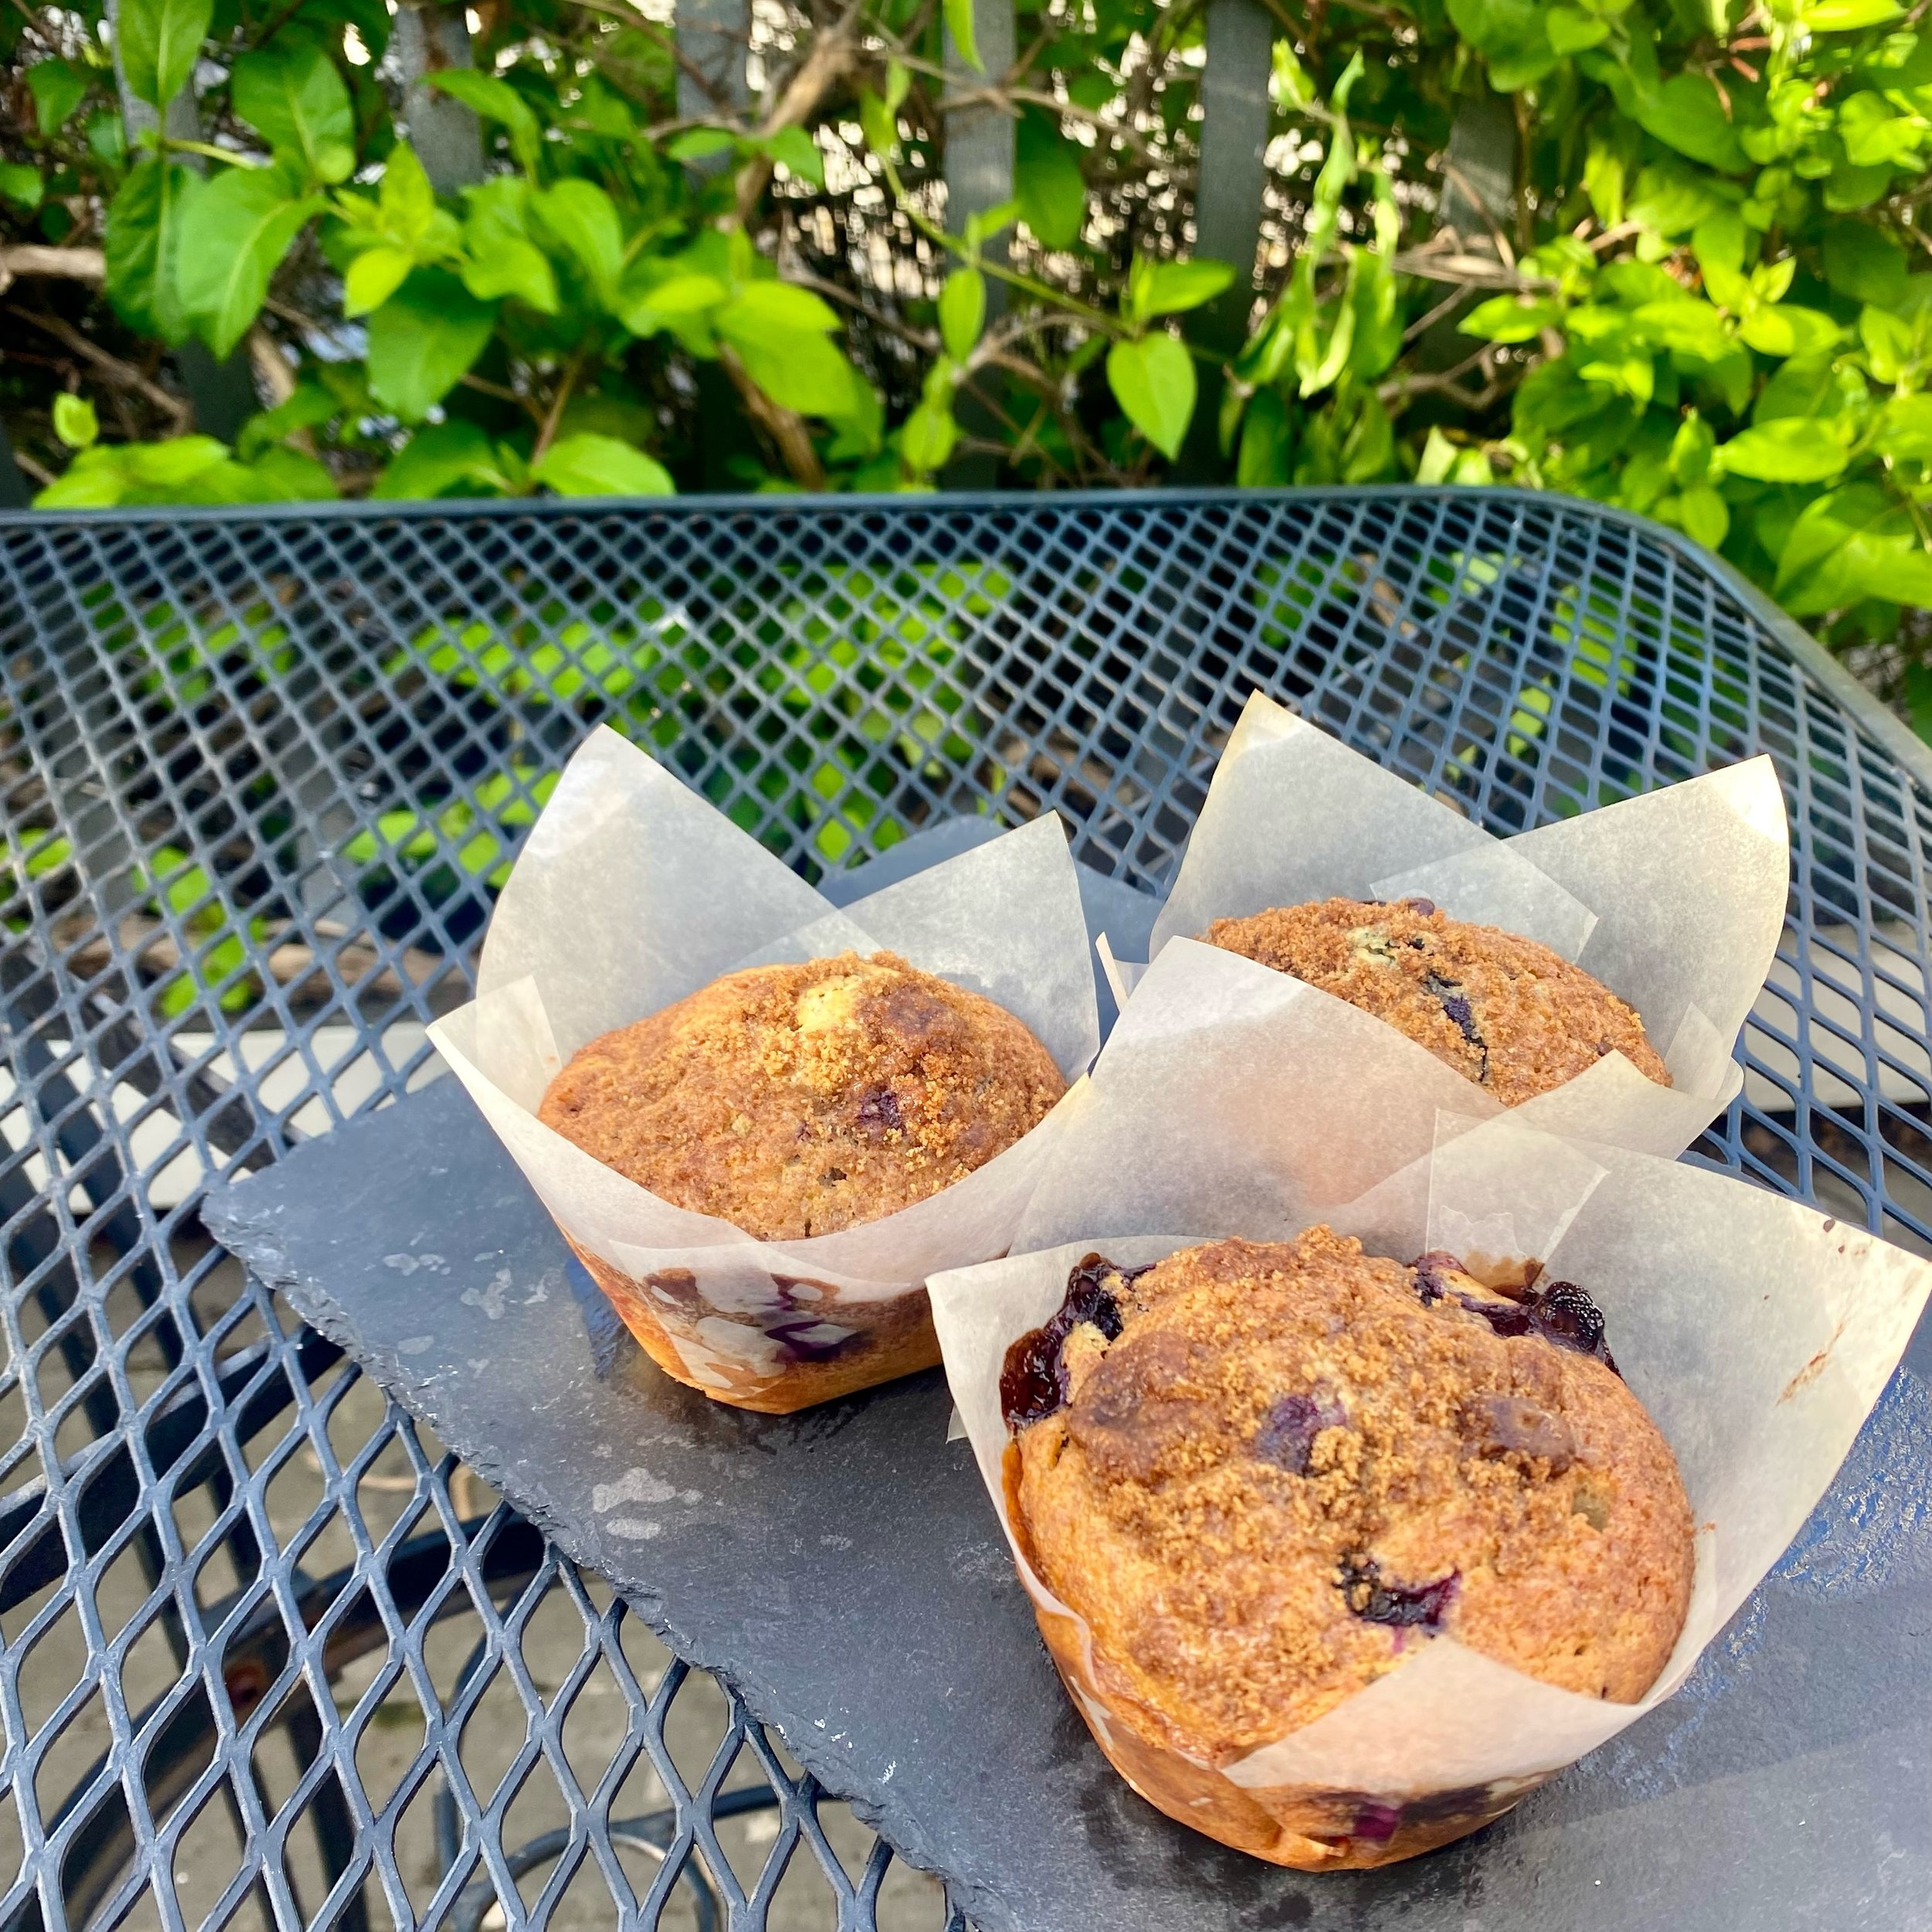 New muffin alert ‼️ 

Fresh Blueberry Muffins topped with Cinnamon Sugar Crumble! They are heavenly. 

#coffee #theriv #cafe #specialtycoffee #specialtyroaster #yelptop100 #pnw #oregon #foodie #breakfast #brunch #lunch #coffeeshop #lunchspot #smallbu